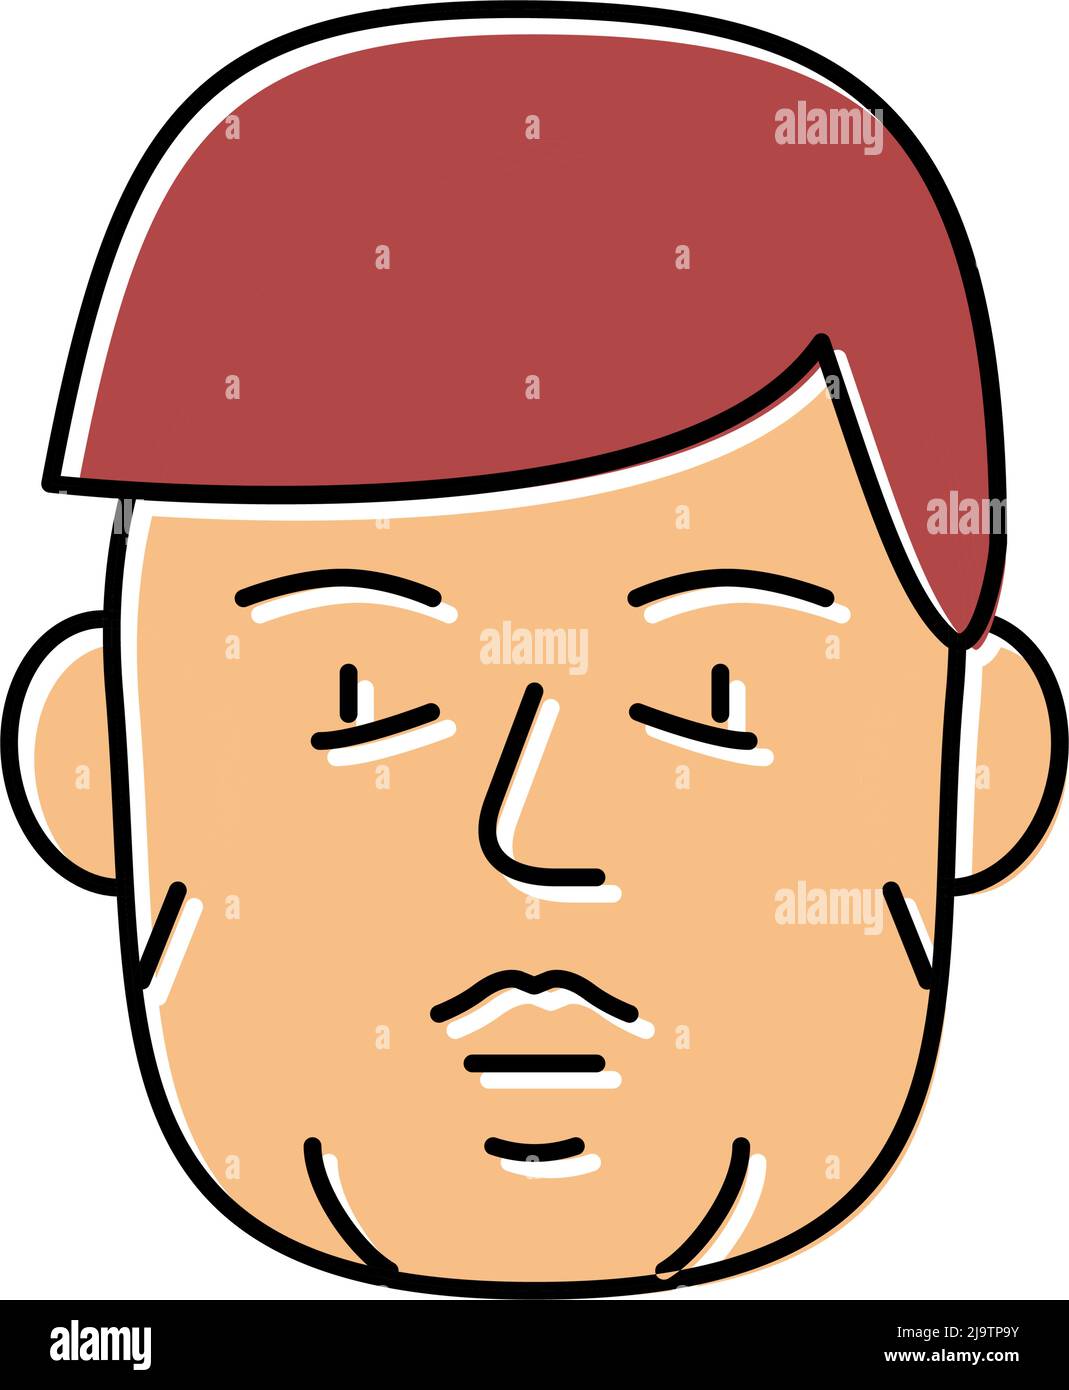 acromegaly endocrinology color icon vector illustration Stock Vector